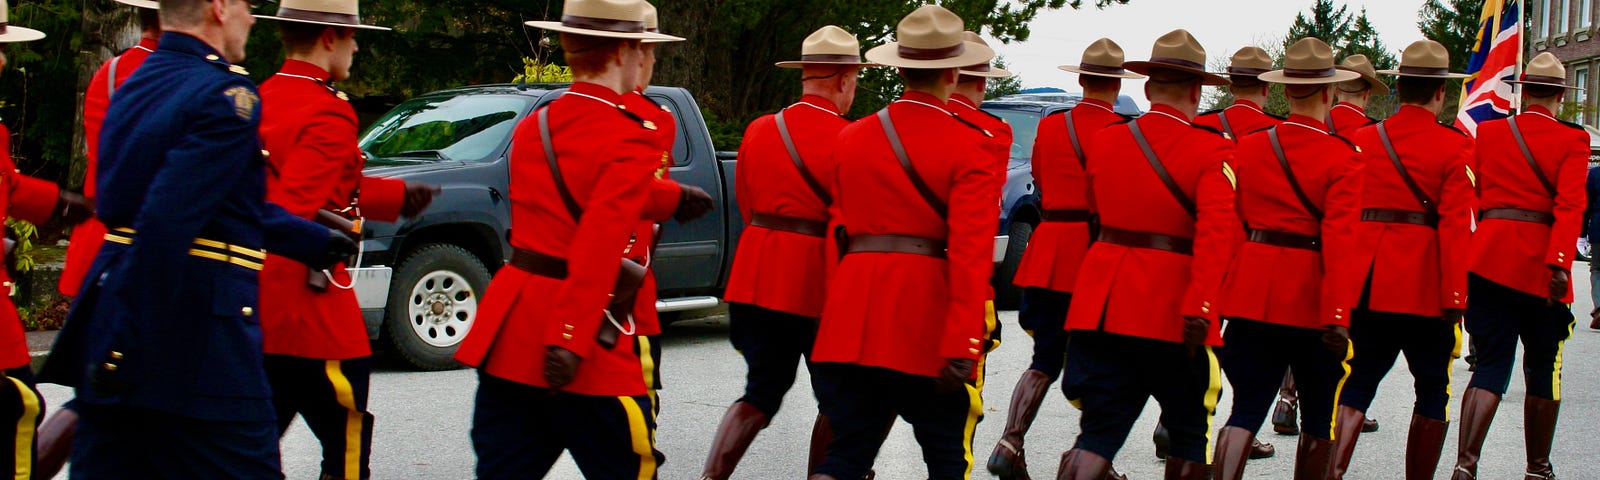 RCMP (The Royal Canadian Mounted Police) march down a street. The photo shows the backs of them walking away from the camera. They are marching in a parade.